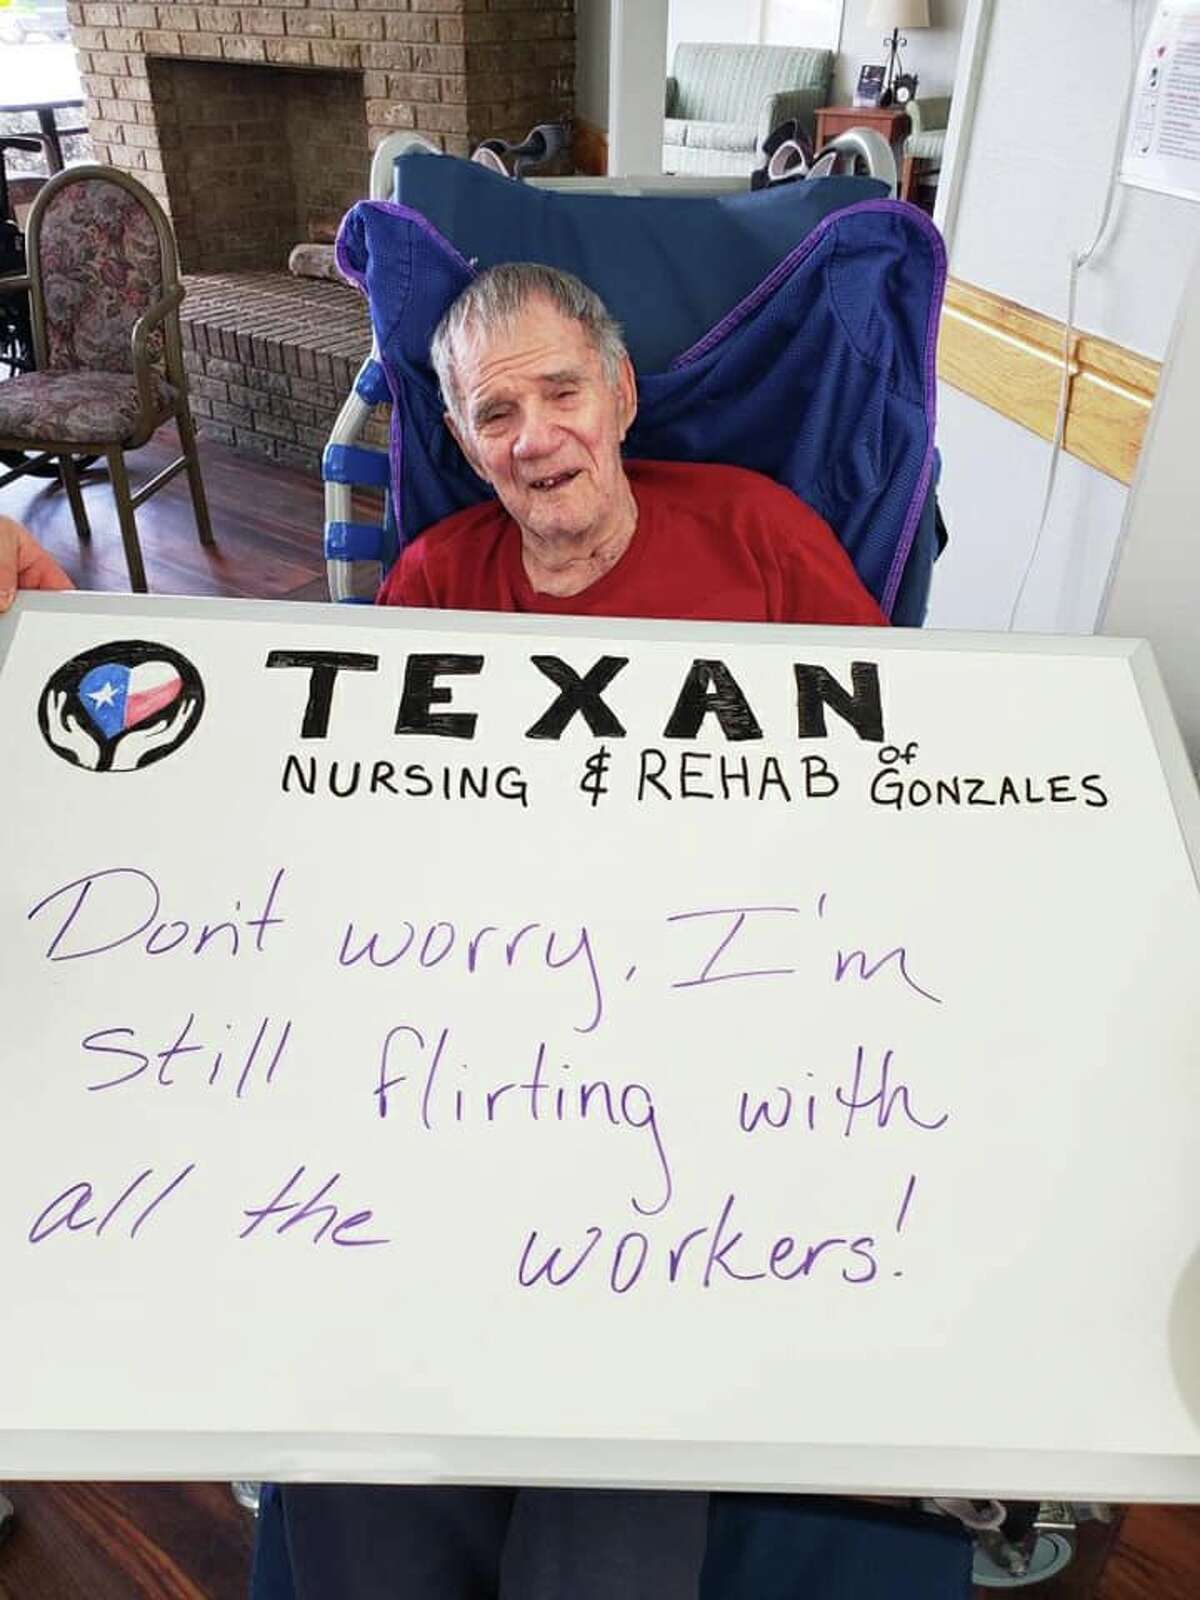 Texan Nursing and Rehab of Gonzales photographs messages from residents, then posts them on Facebook for families and friends to see.